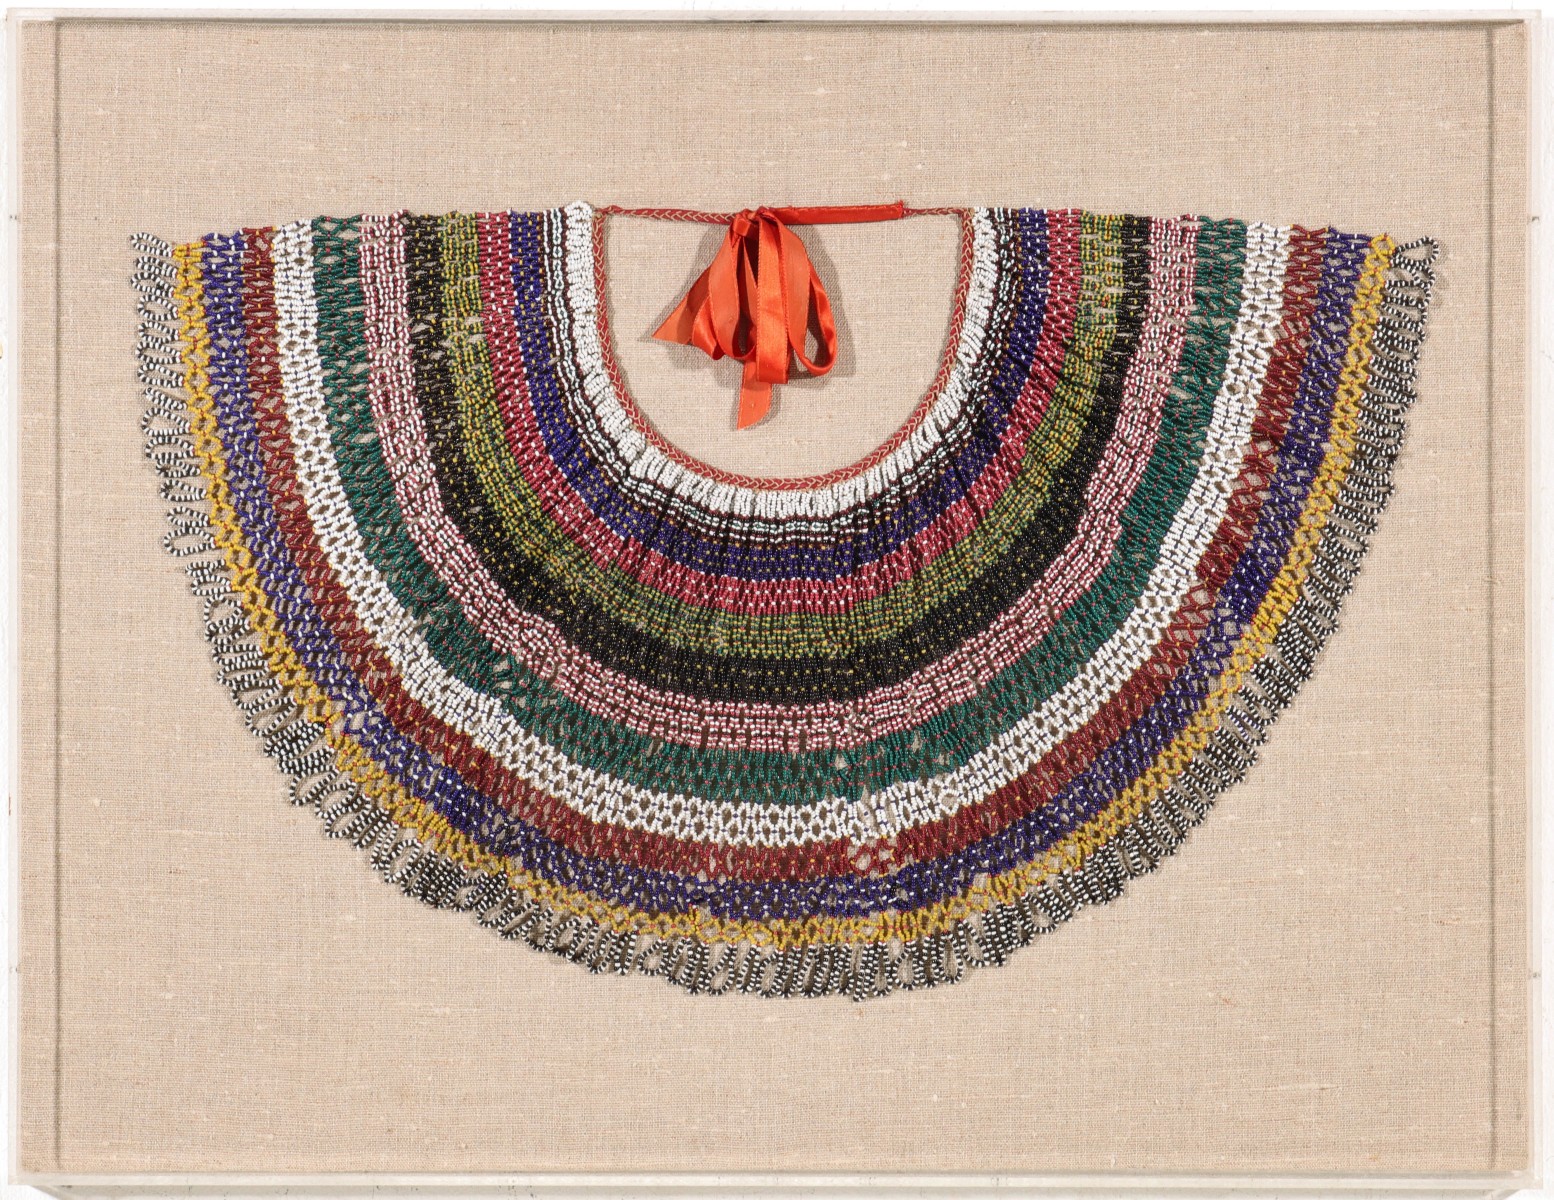 A VERY COMPLEX PIT RIVER WOMAN'S BEADED COLLAR